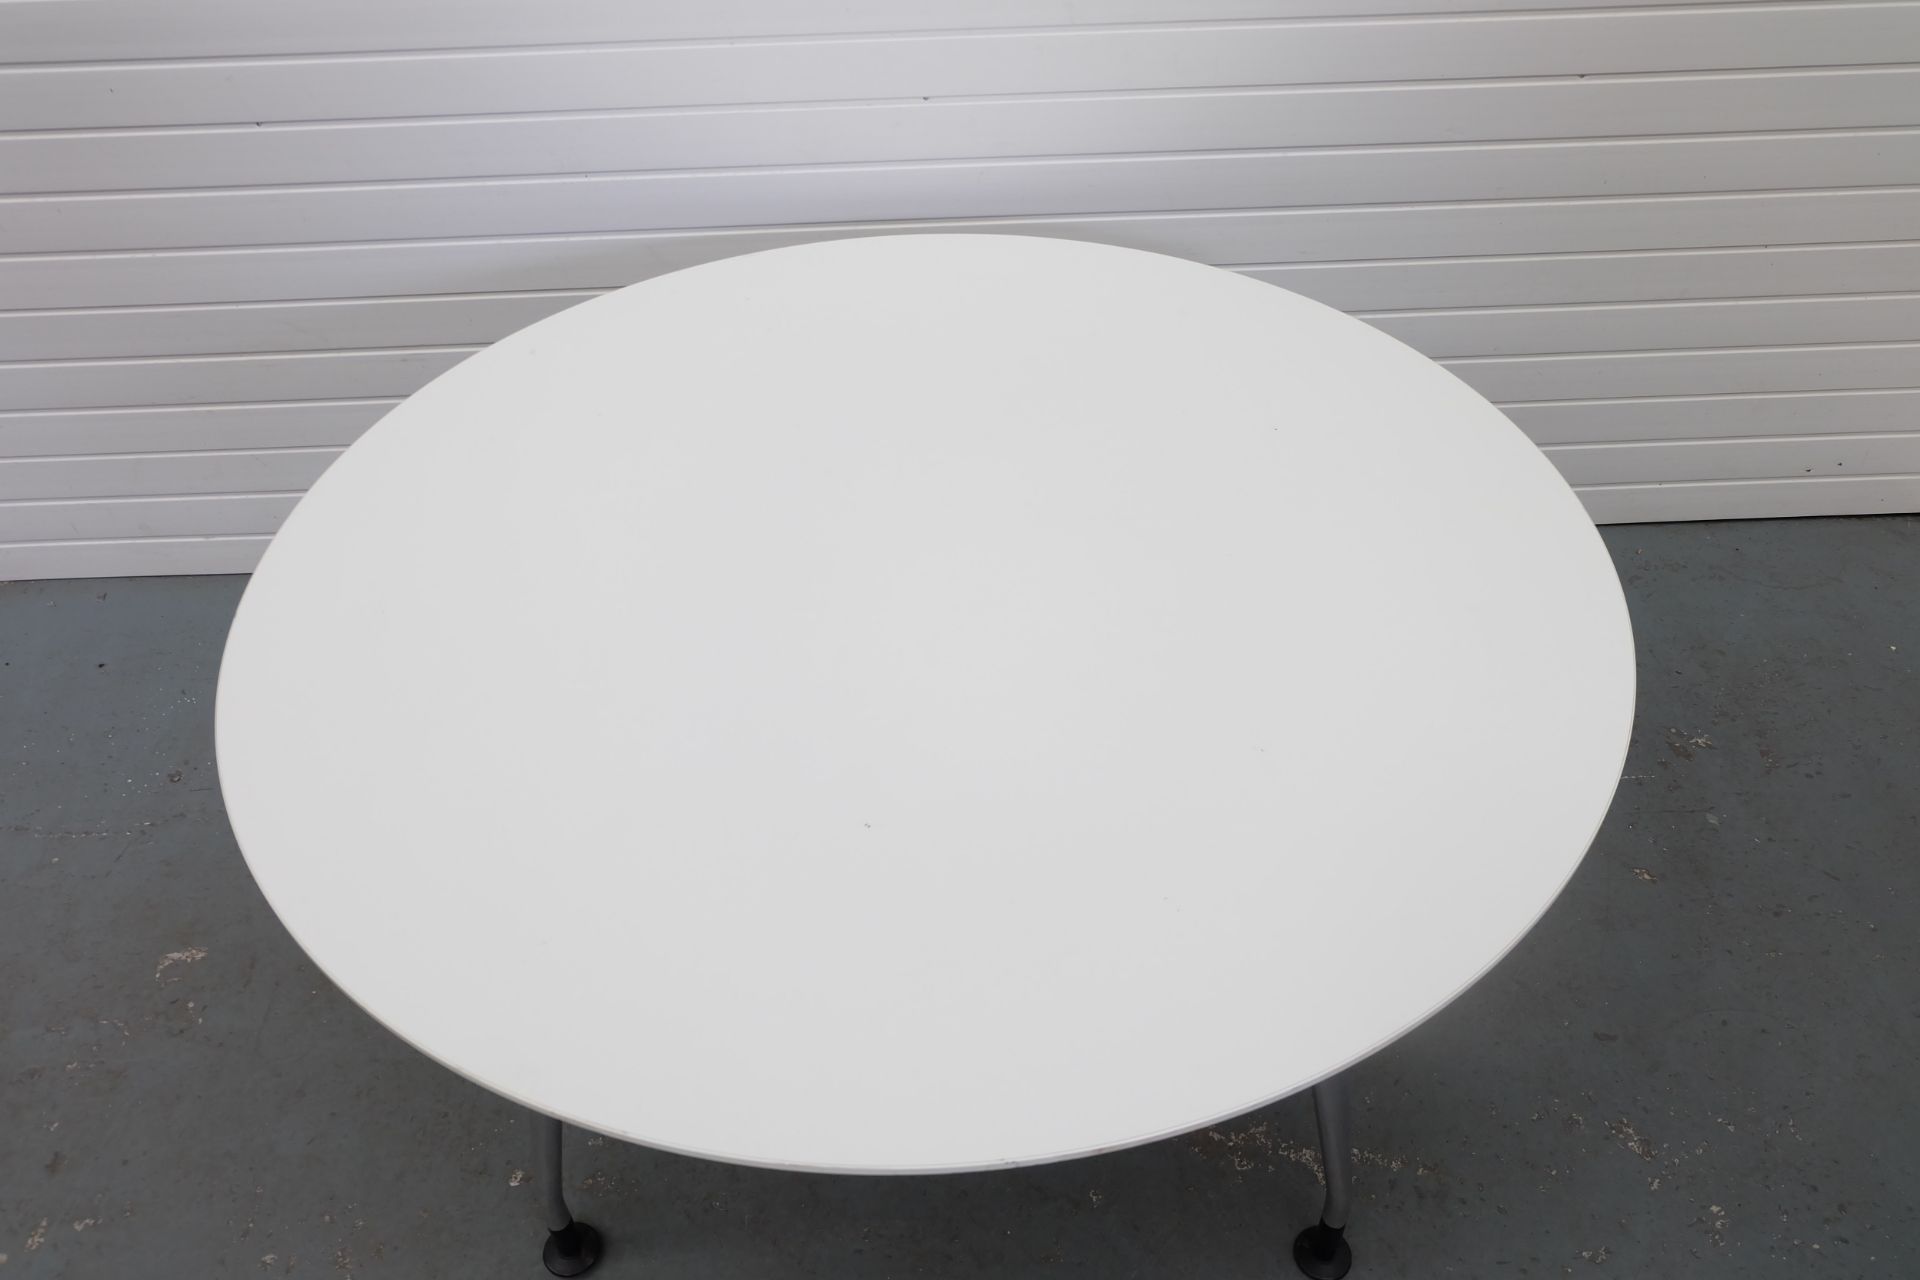 White Round Table. 4 Metal Legs and Adjustable Feet. Size 1500mm Diameter x 800mm High. - Image 3 of 3